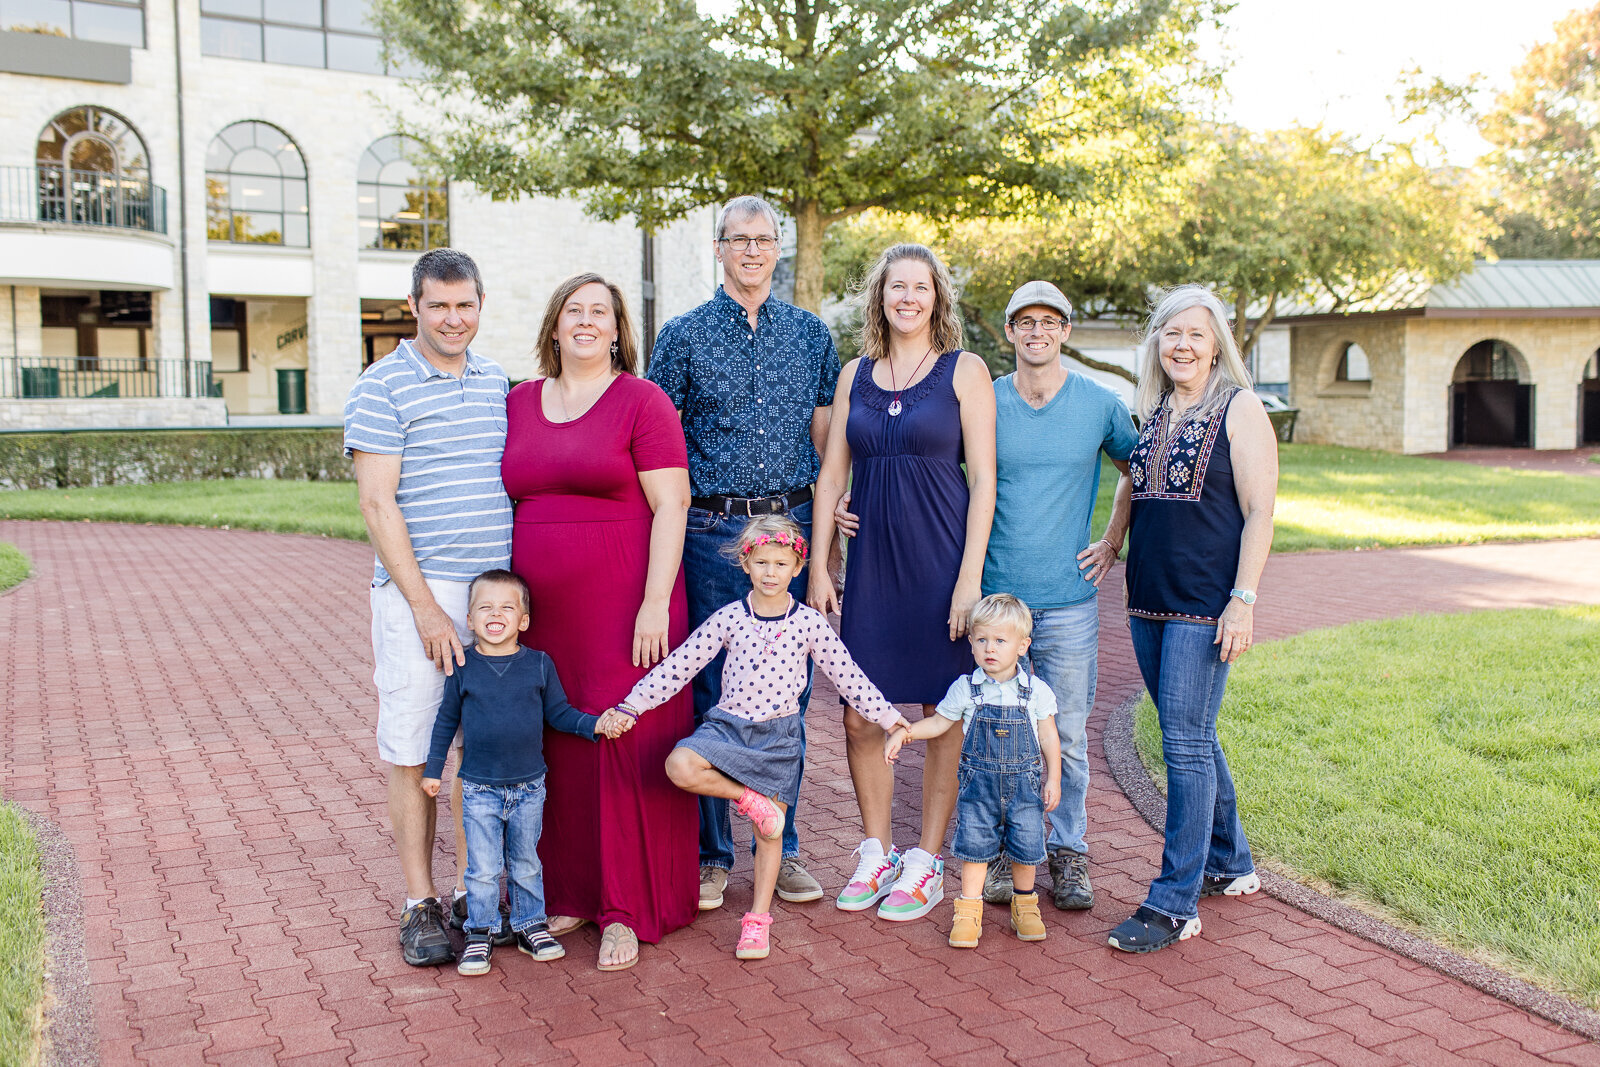 Outdoor_extended_family_lifestyle_photograph_session_lexington_ky_photographer